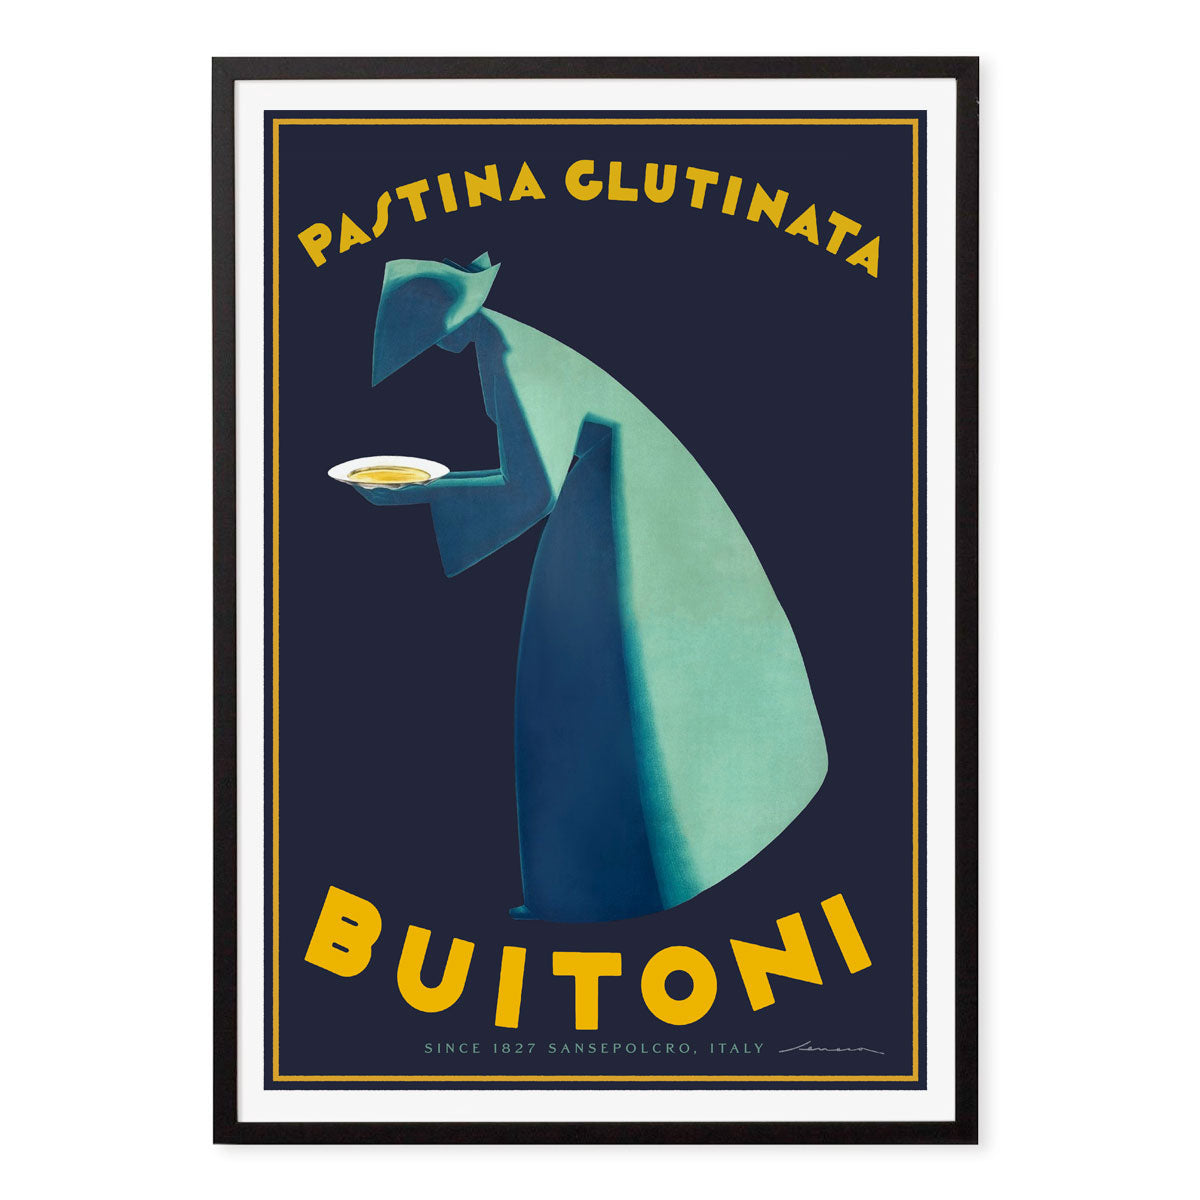 Buitoni Pasta Italy retro vintage poster print in black frame from Places We Luv